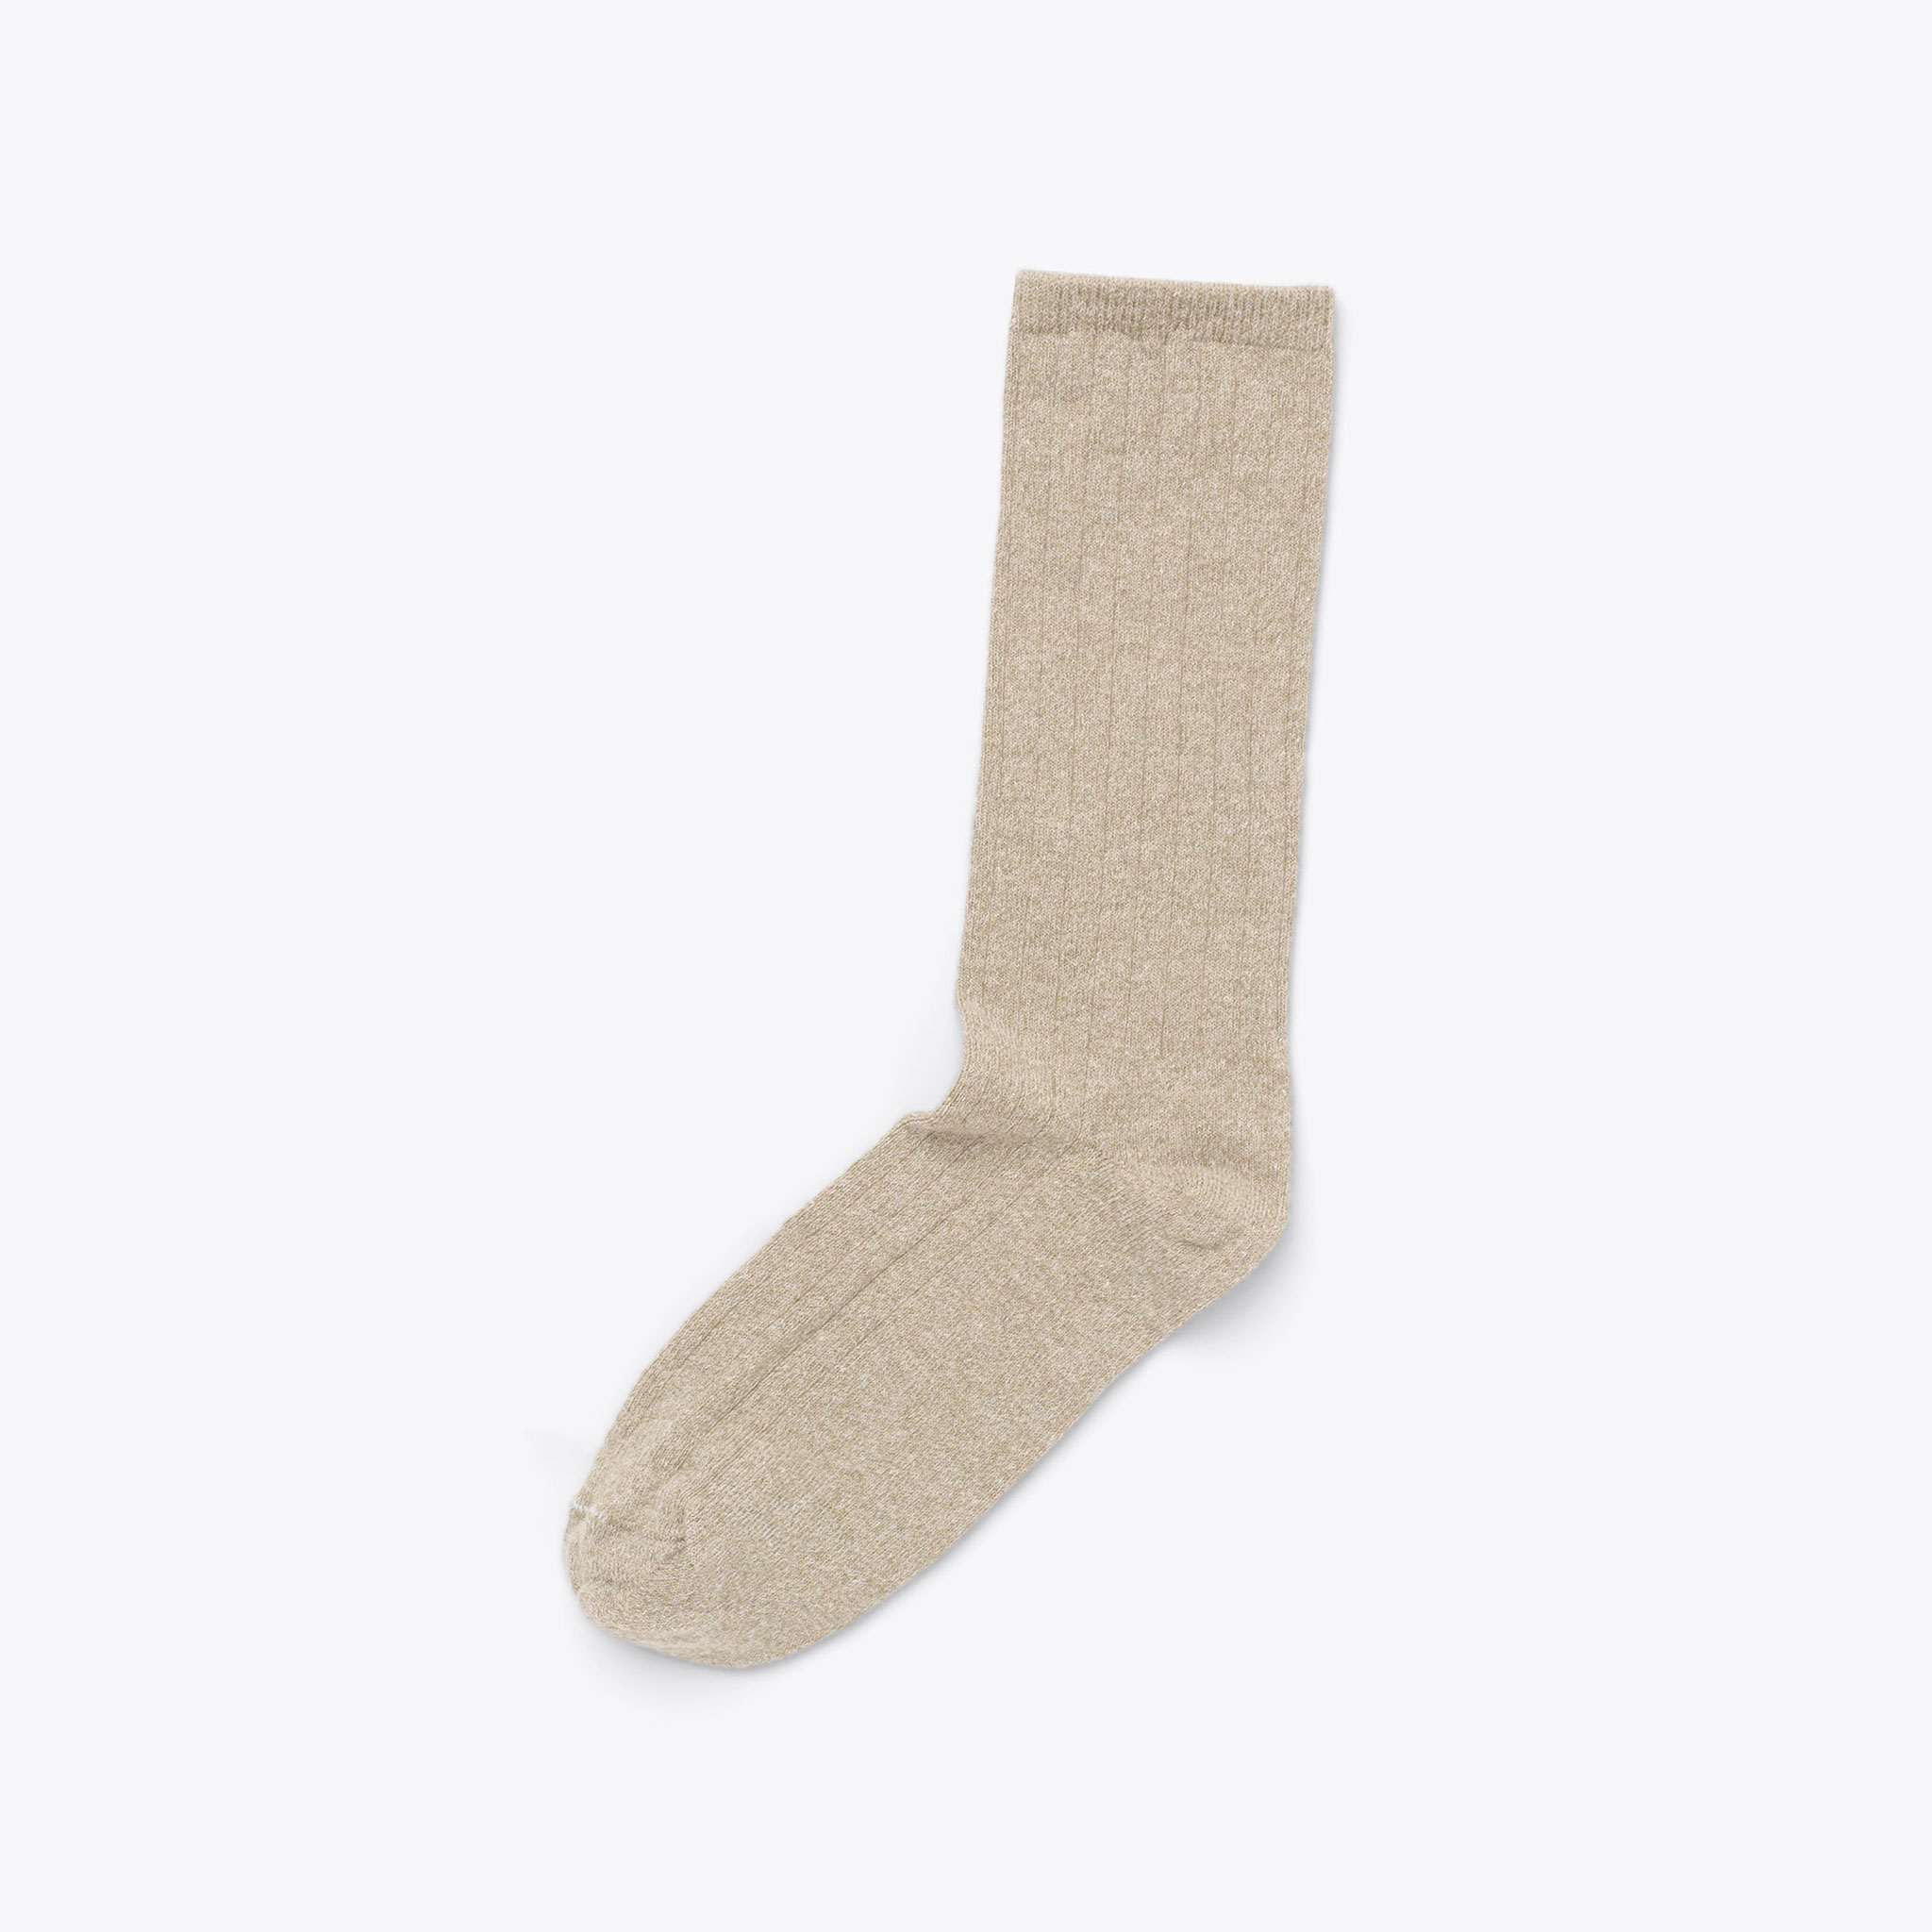 Nisolo Cotton Crew Sock Oat - Every Nisolo product is built on the foundation of comfort, function, and design. 